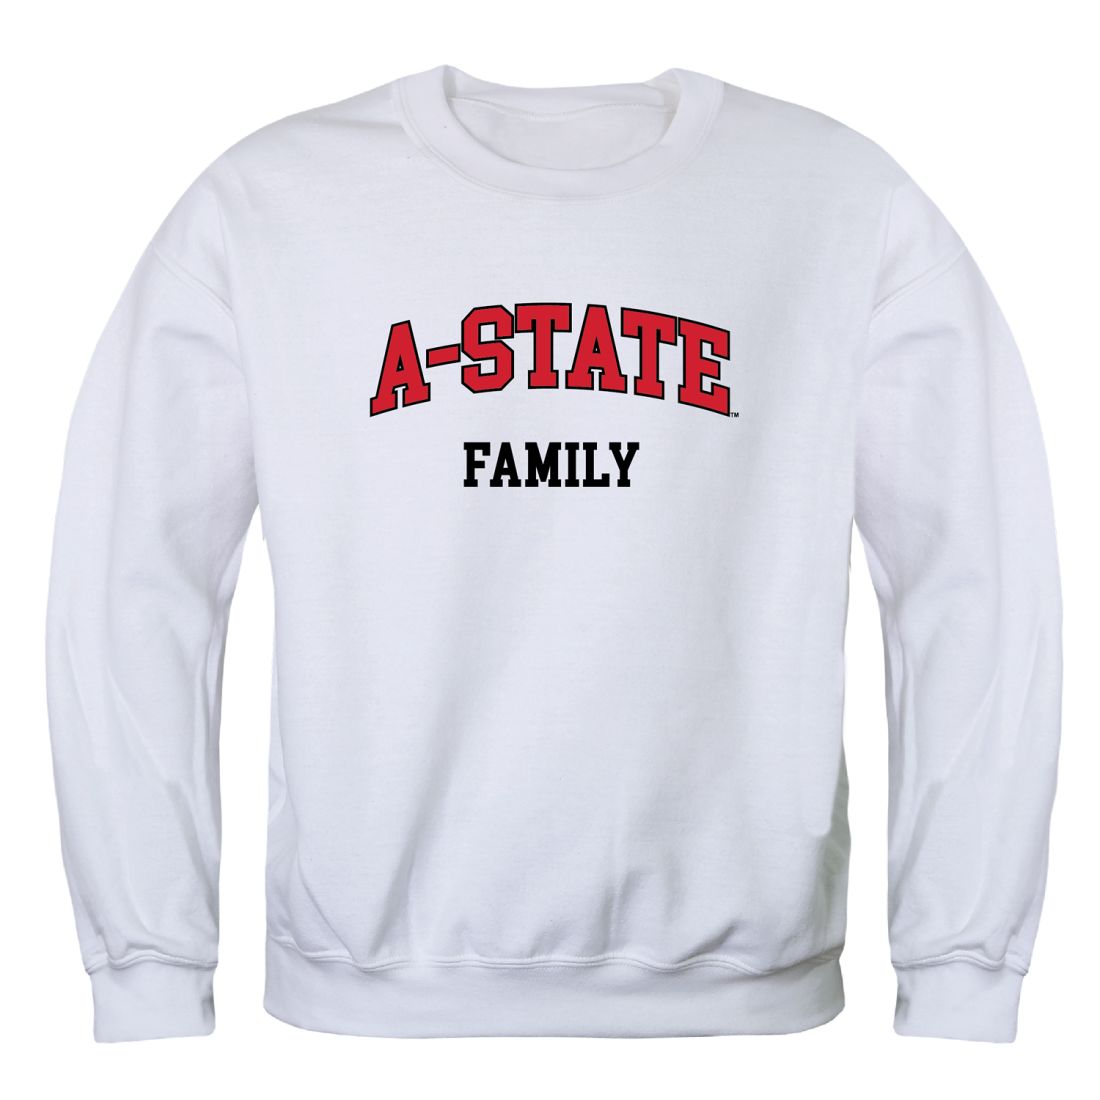 Arkansas-State-University-A-State-Red-Wolves-Family-Fleece-Crewneck-Pullover-Sweatshirt